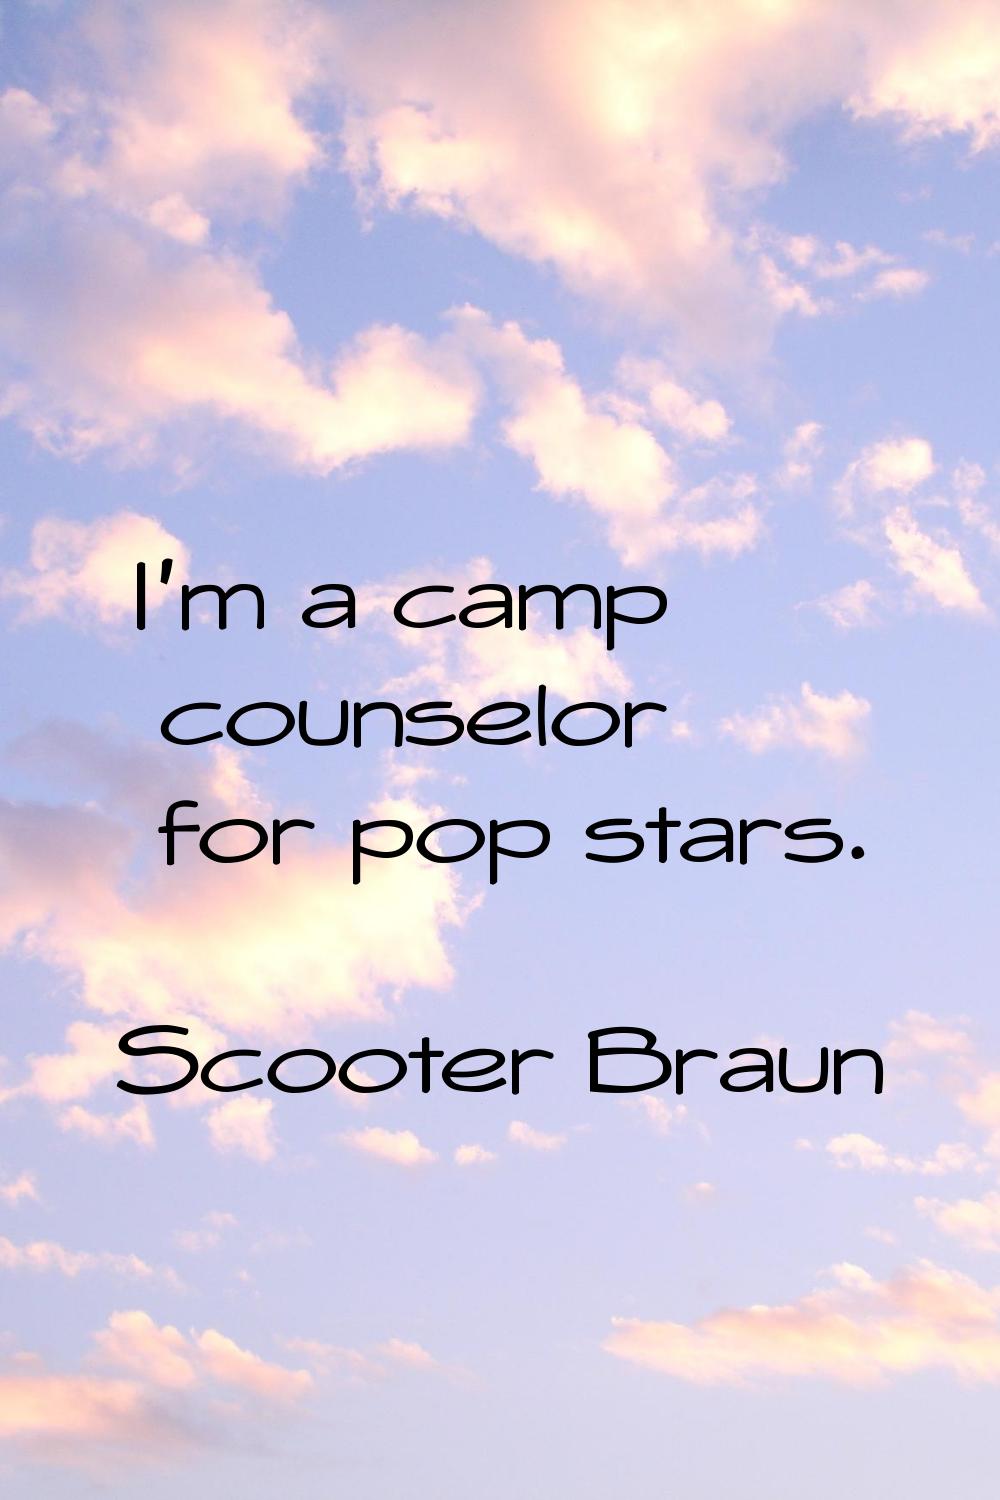 I'm a camp counselor for pop stars.